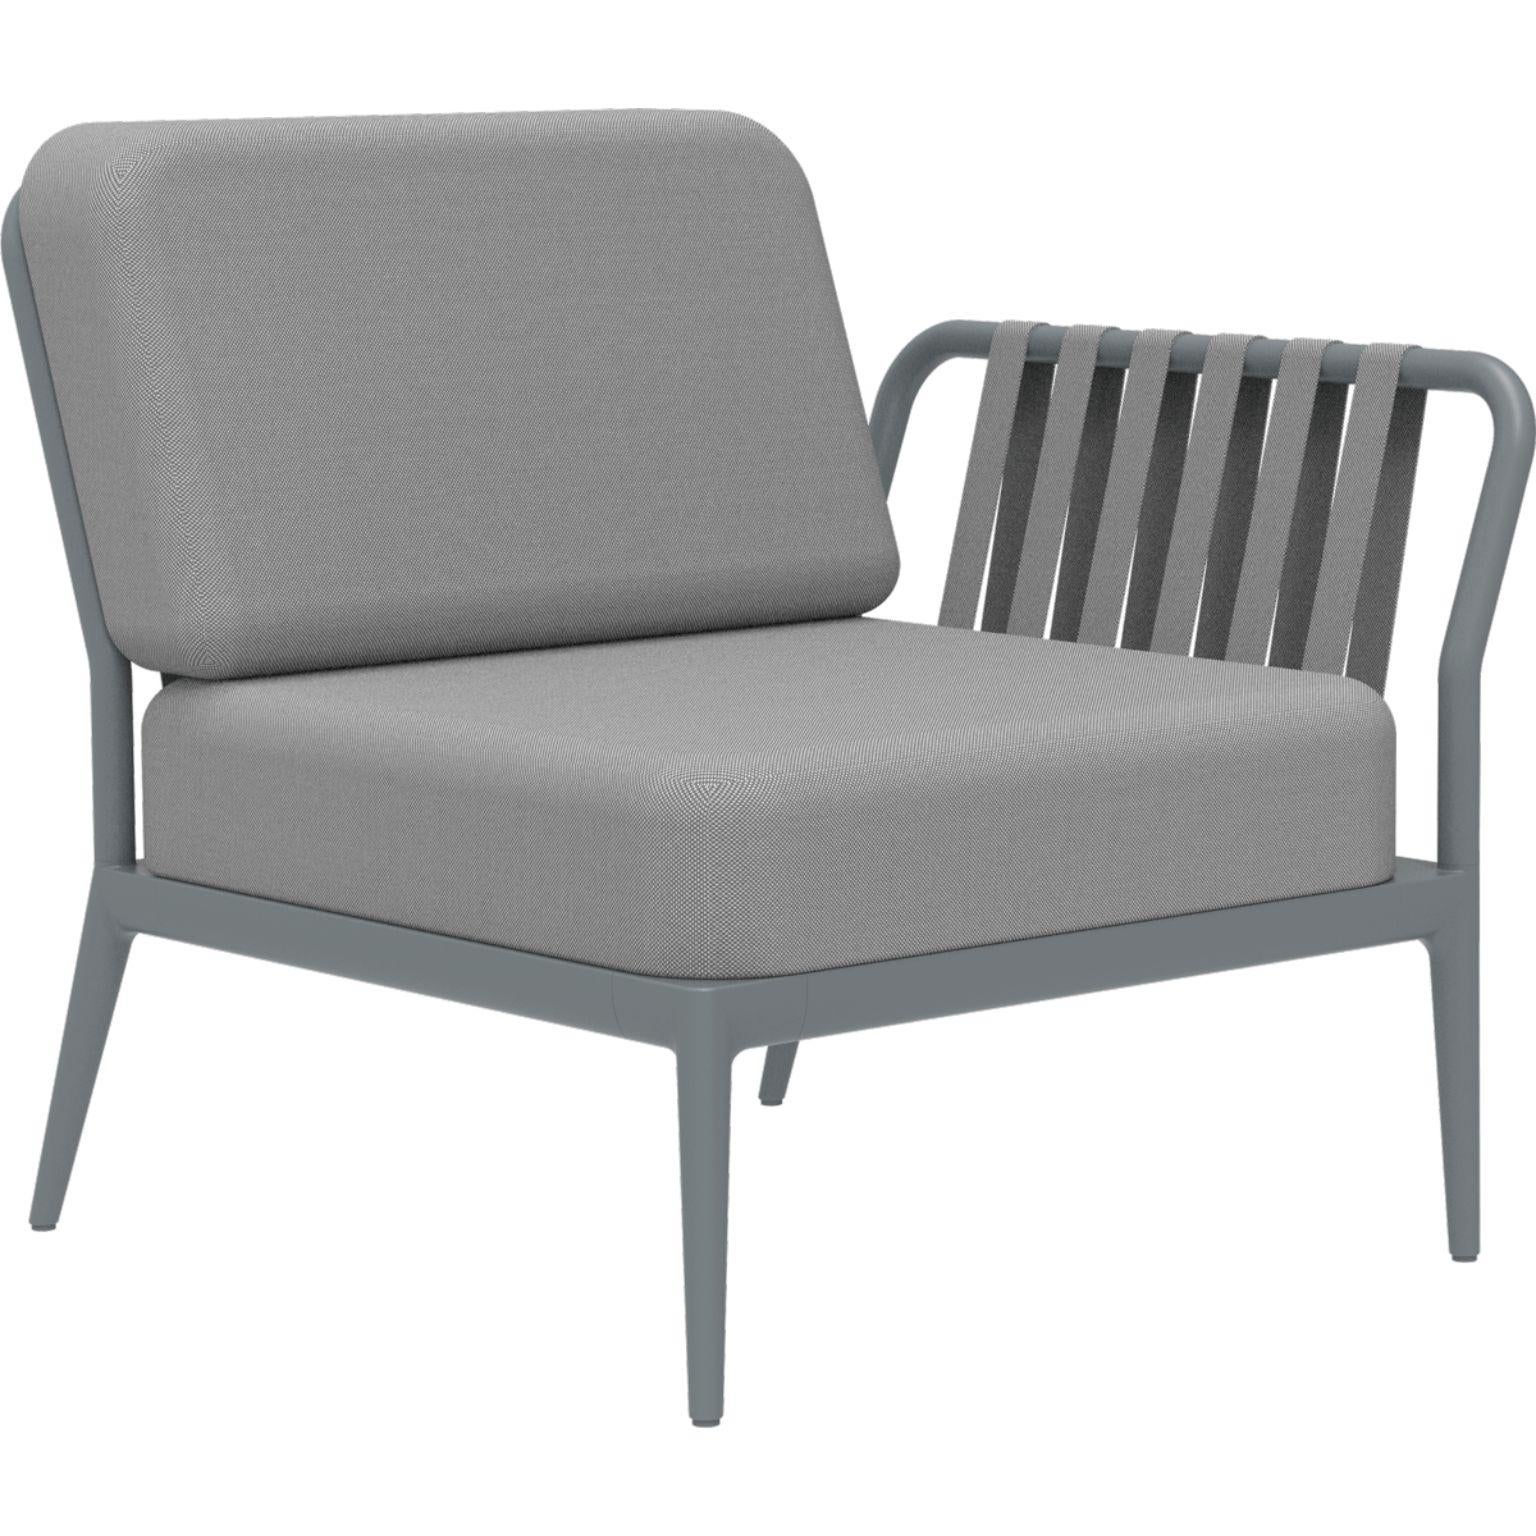 Ribbons grey left modular sofa by MOWEE
Dimensions: D83 x W80 x H81 cm (seat height 42 cm)
Material: Aluminum and upholstery
Weight: 19 kg
Also available in different colours and finishes. 

An unmistakable collection for its beauty and